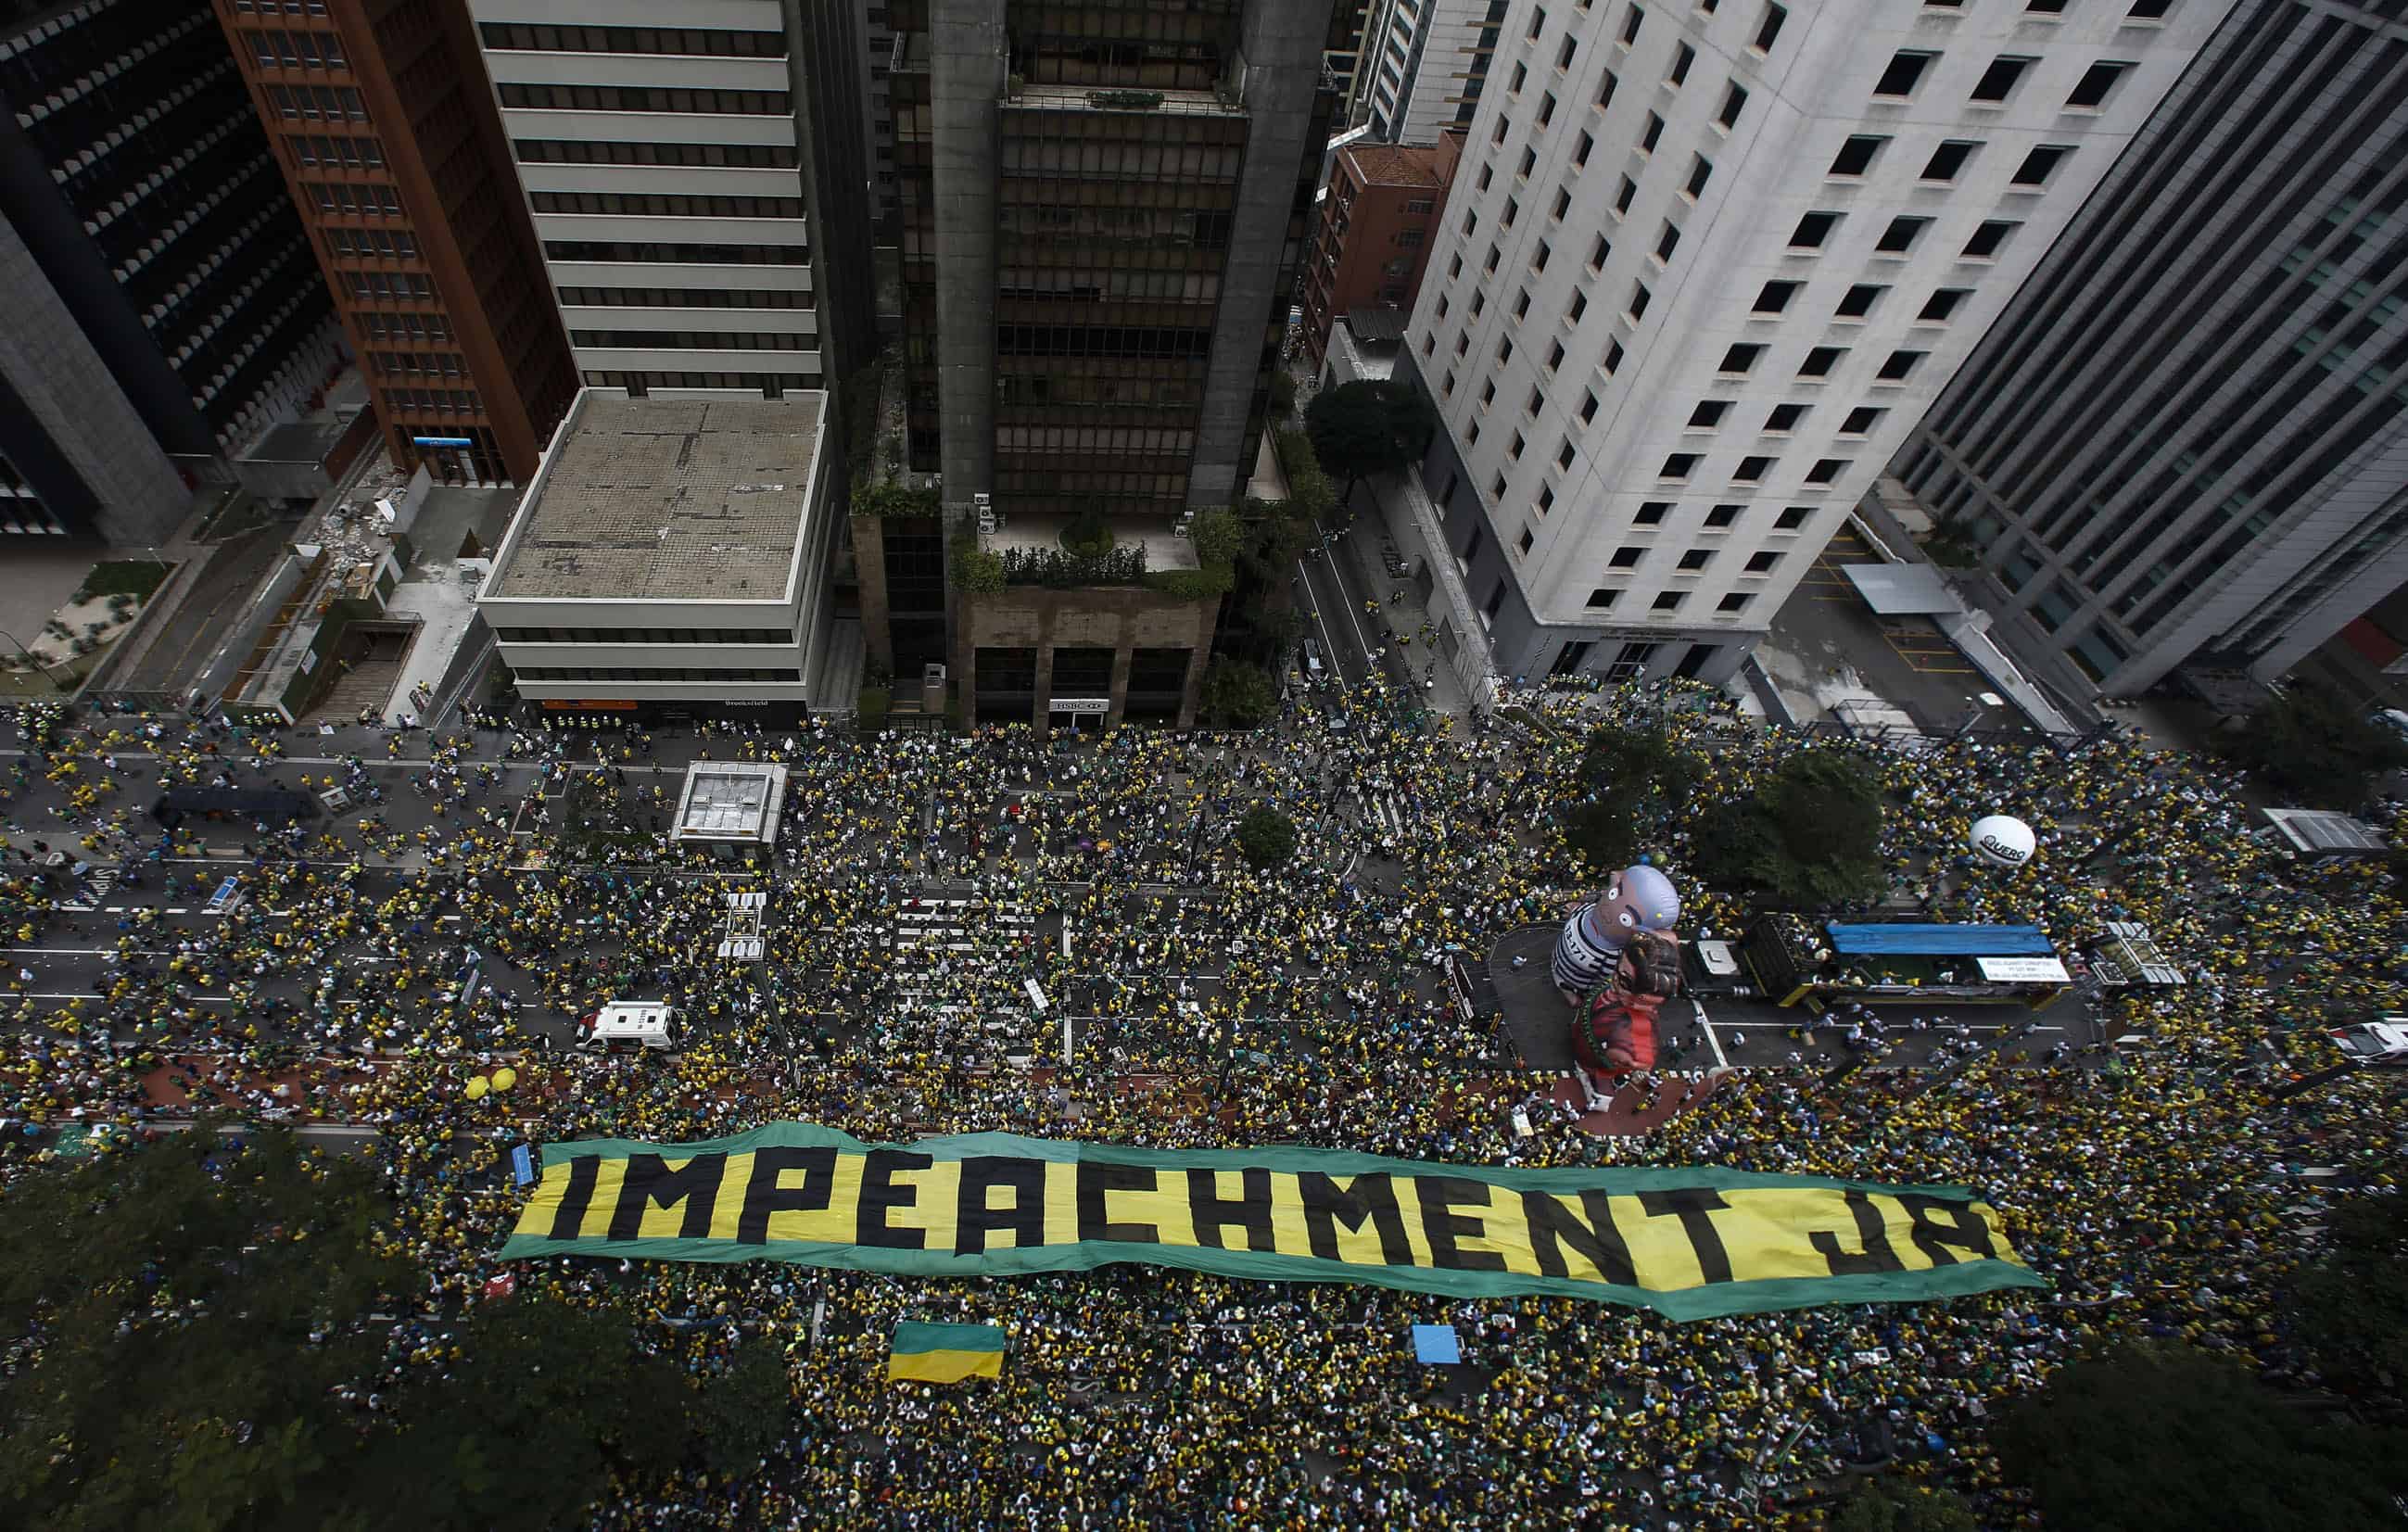 Protesters demand the resignation of Brazilian President Dilma Rousseff on March 13, 2016 in São Paulo.